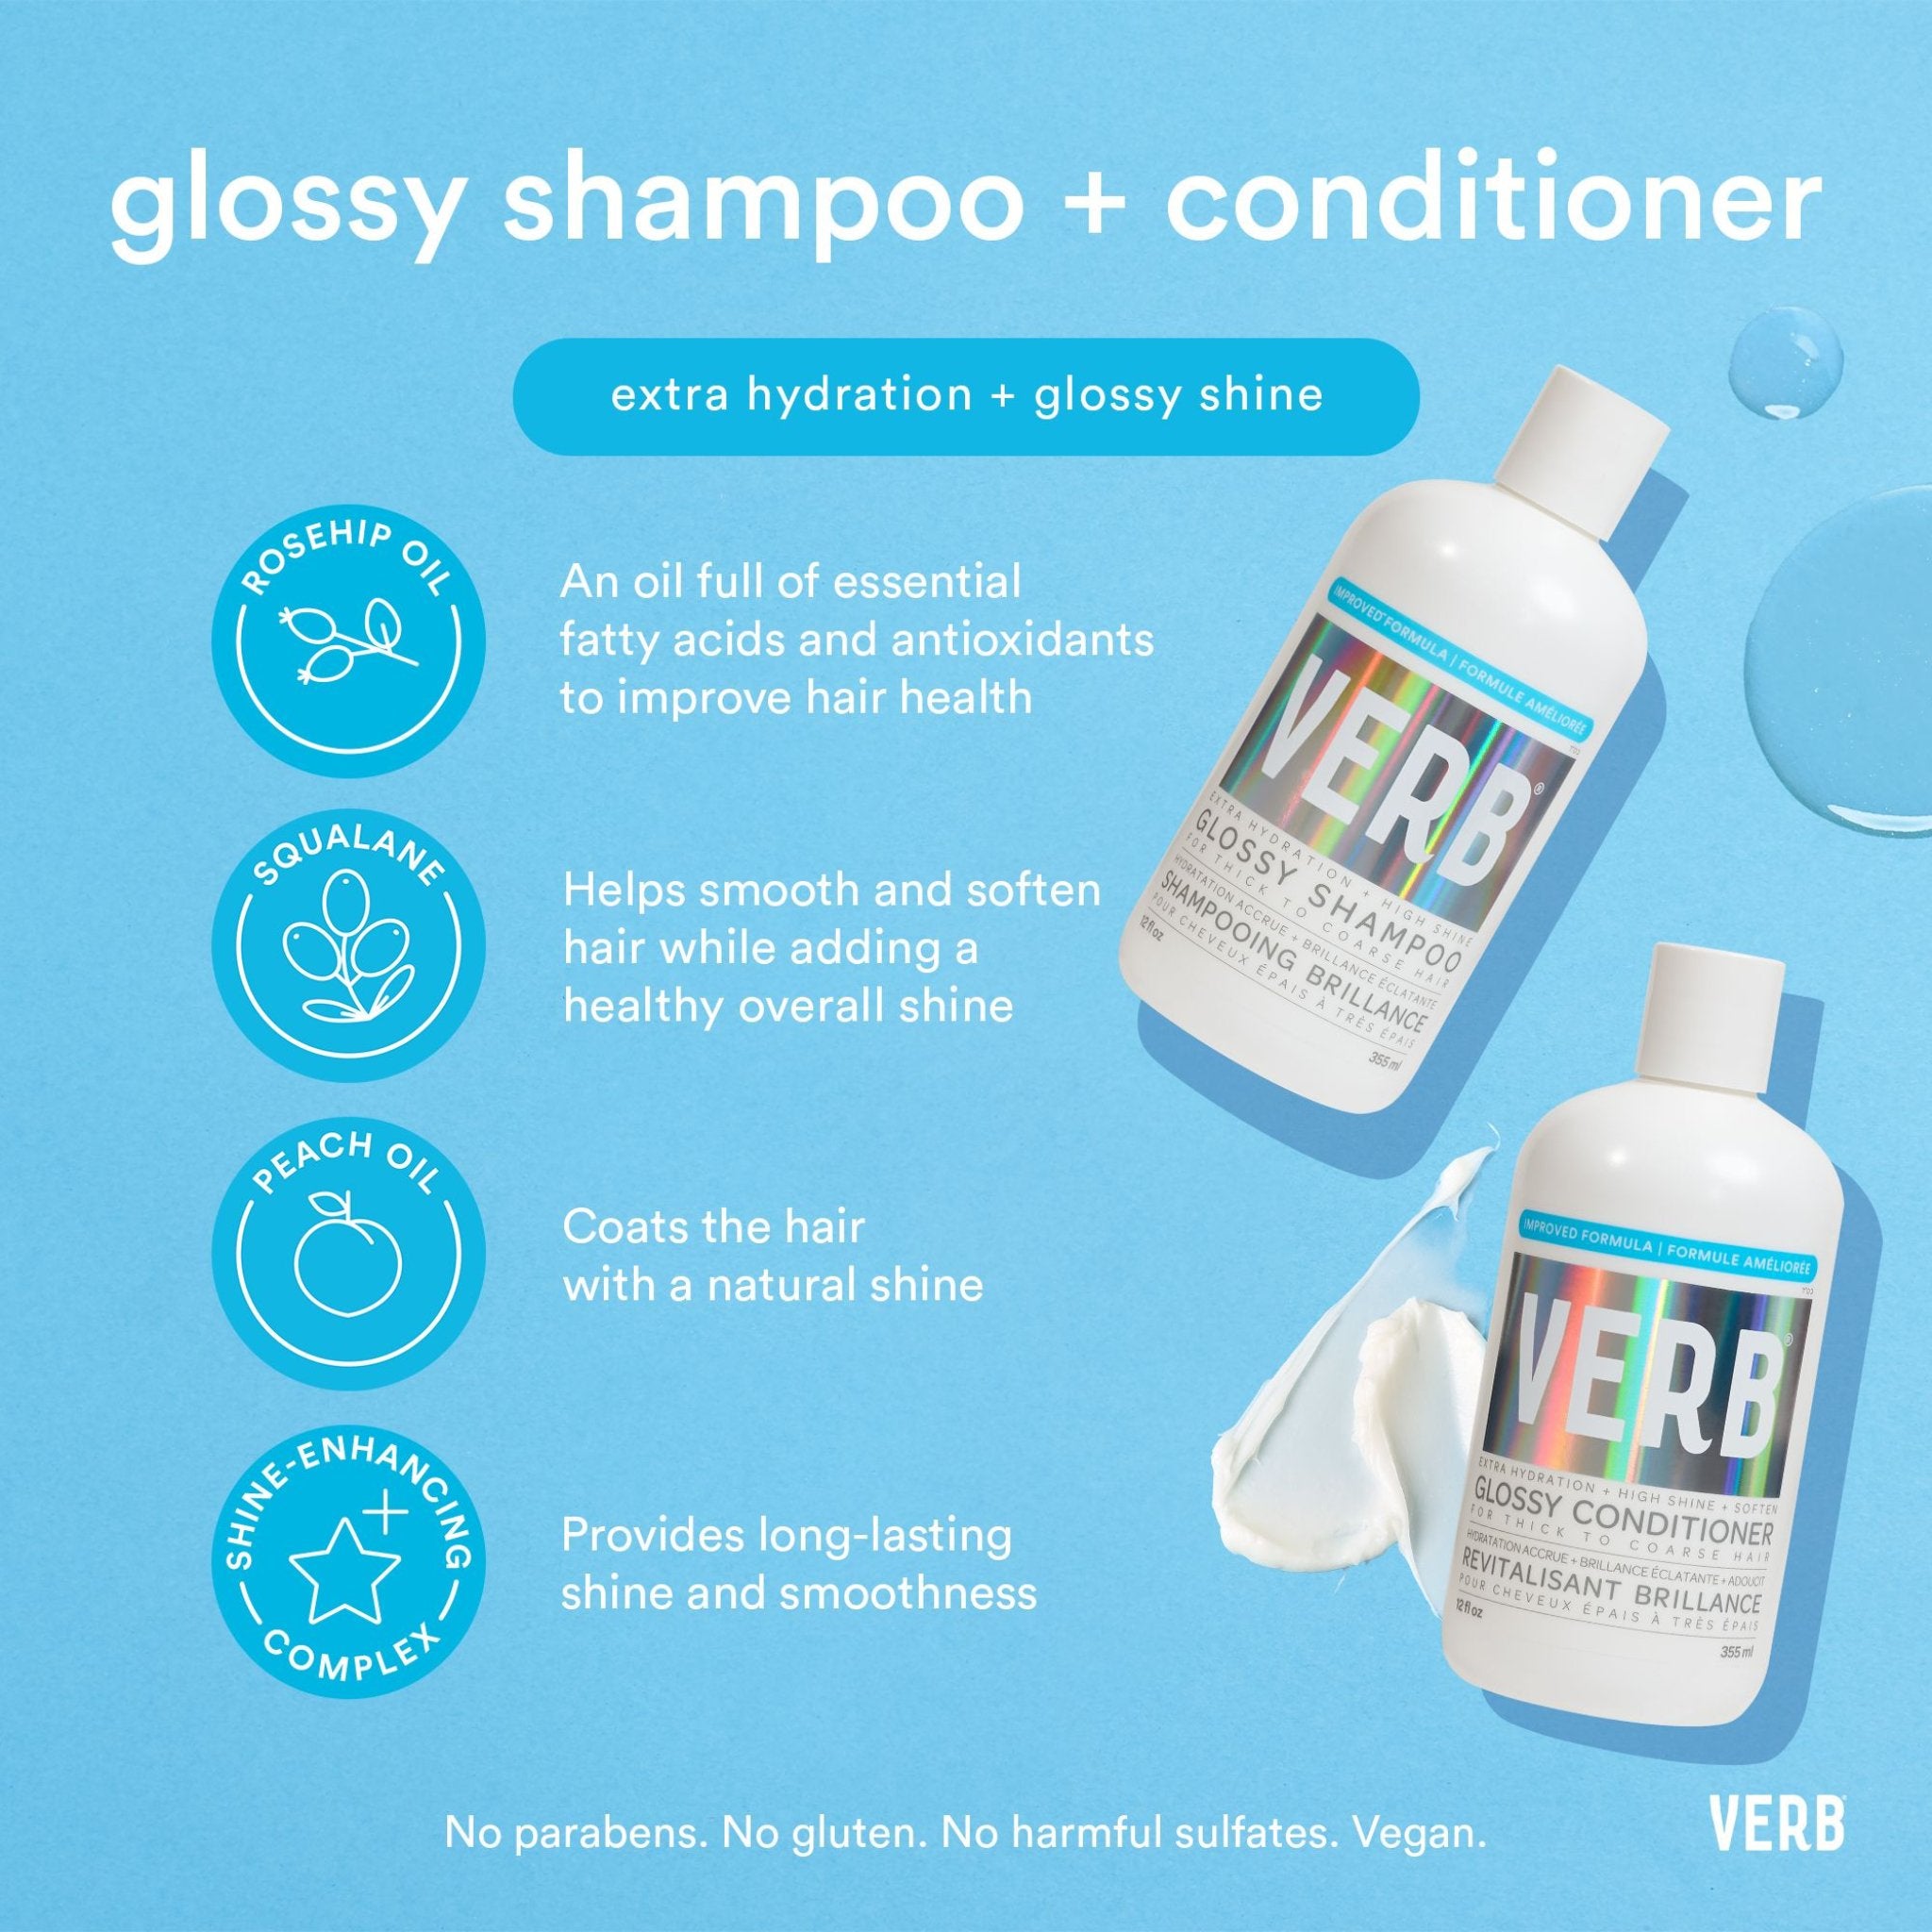 Verb. Shampoing Glossy - 355 ml - Concept C. Shop